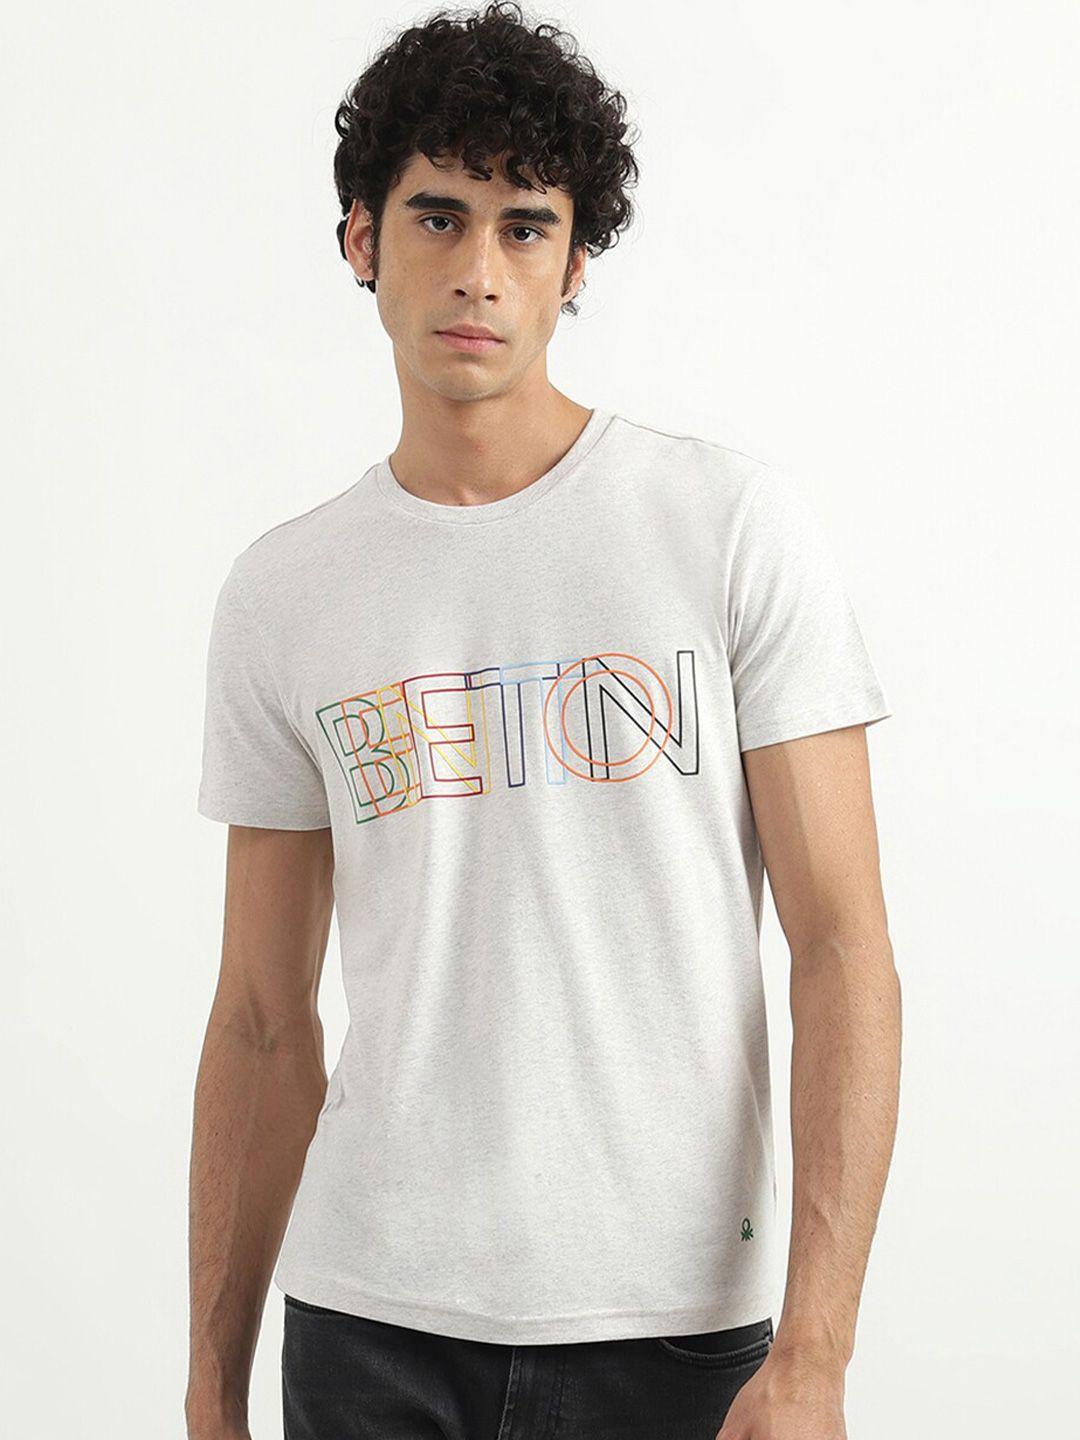 united colors of benetton men grey typography printed t-shirt